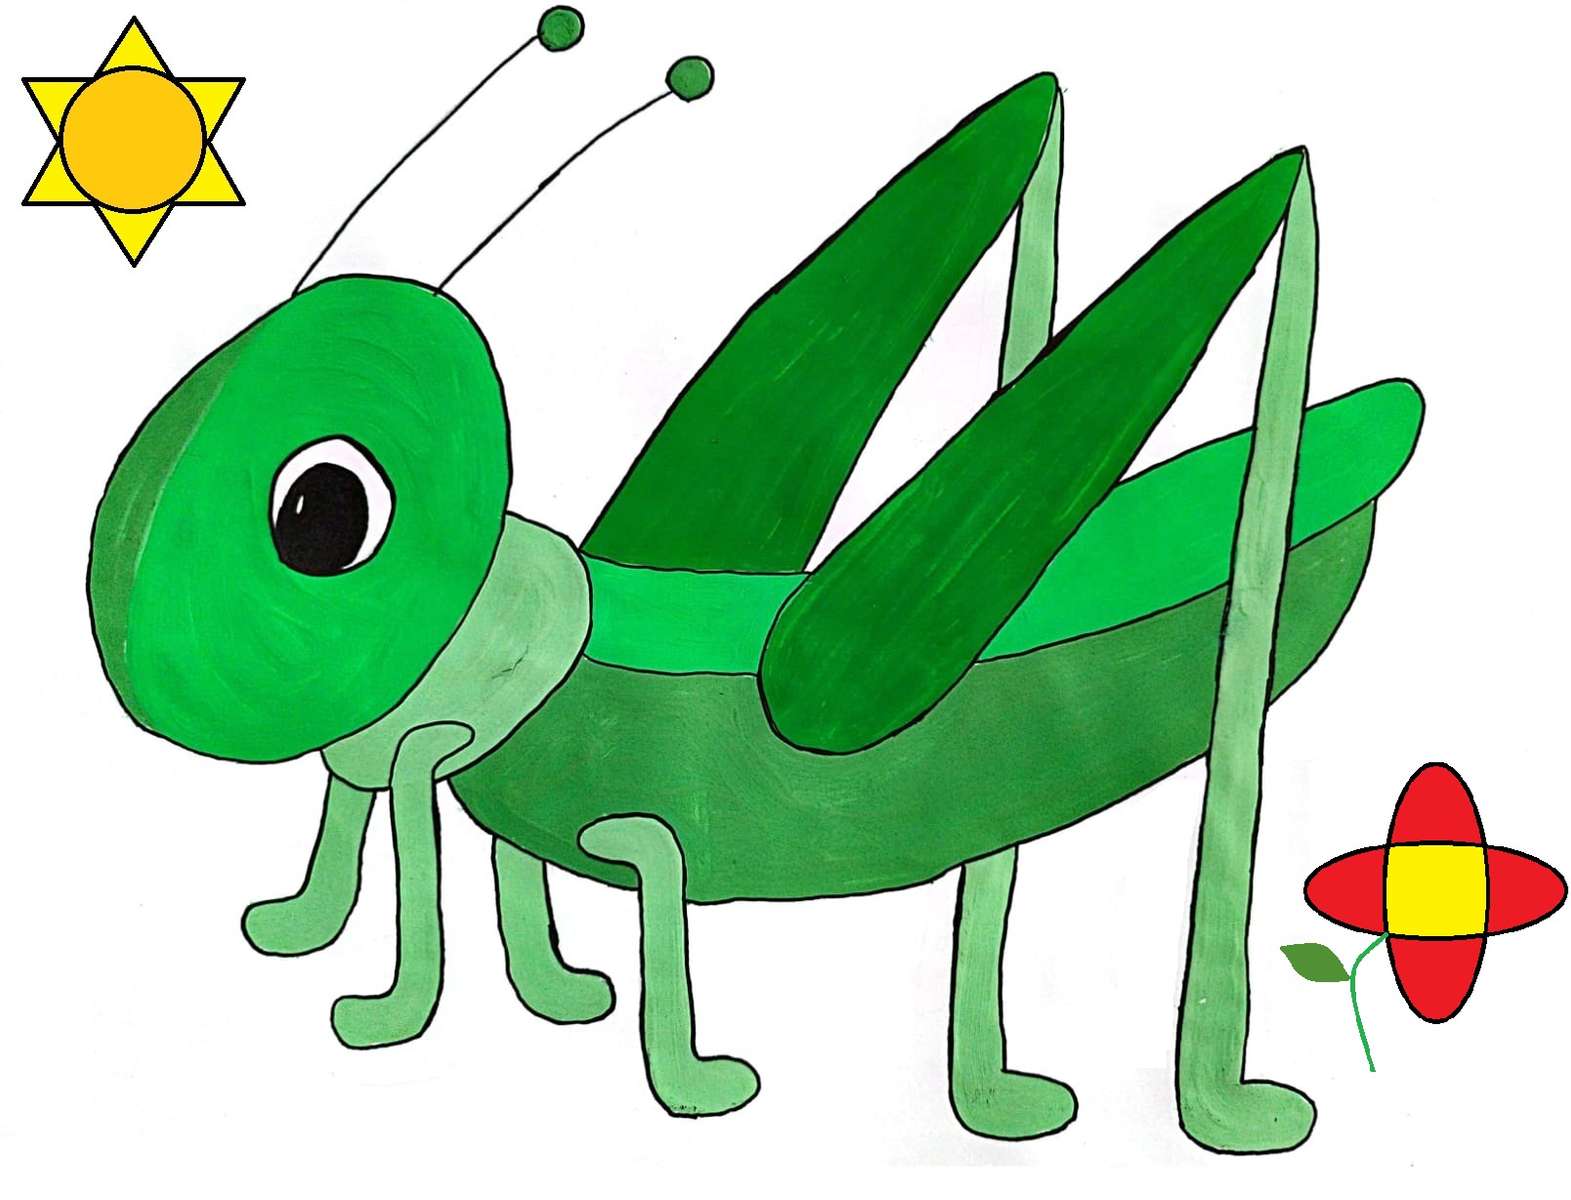 Insect - Sprinkhaan online puzzel